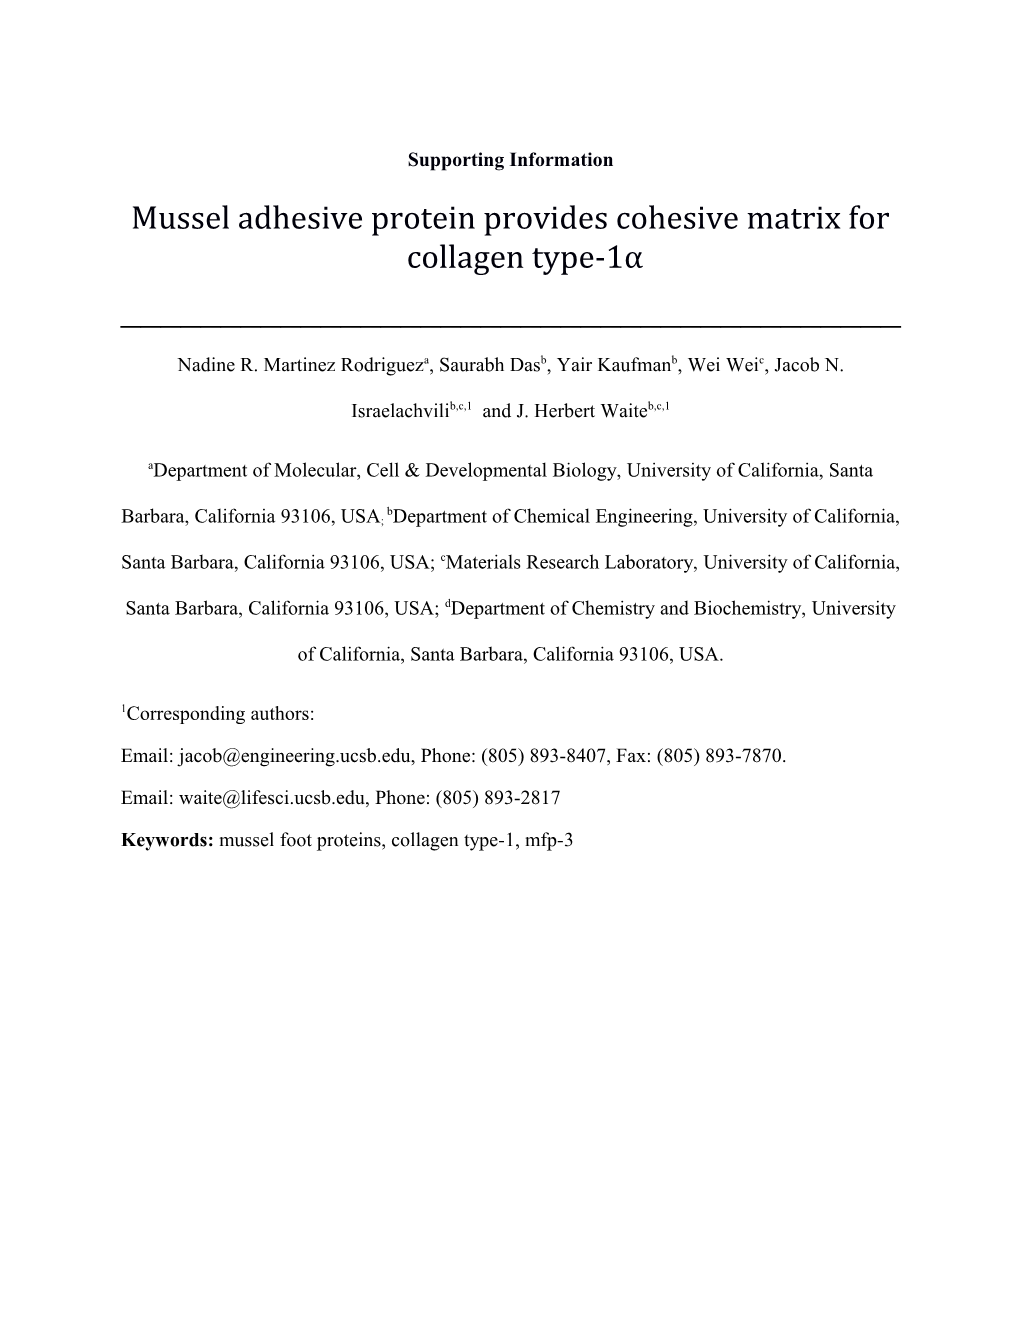 Mussel Adhesive Protein Provides Cohesive Matrix for Collagen Type-1Α